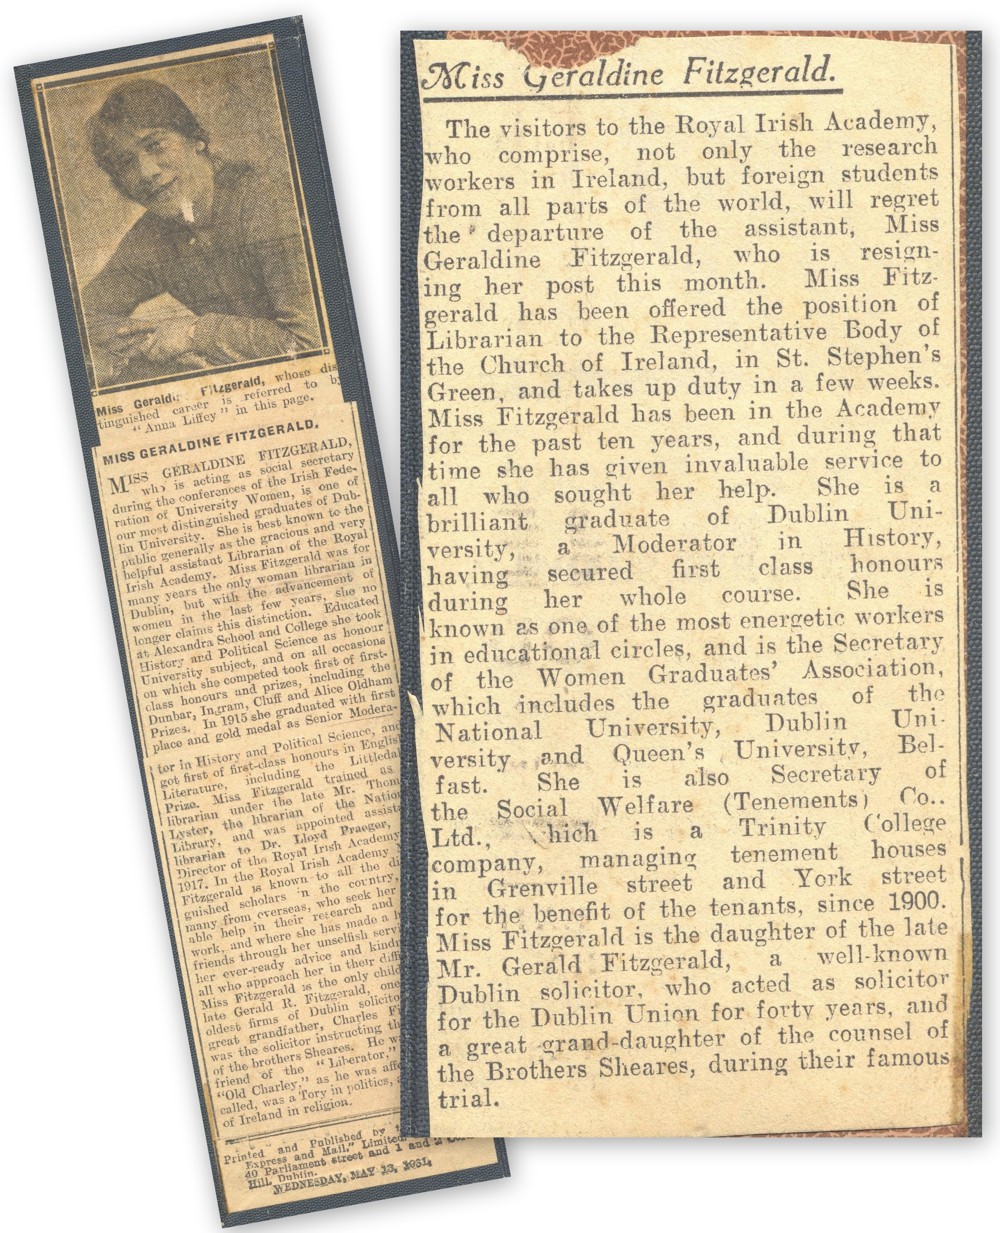 Press cuttings recounting the achievements of Miss Geraldine Fitzgerald, RCB Library Ms 1008/3